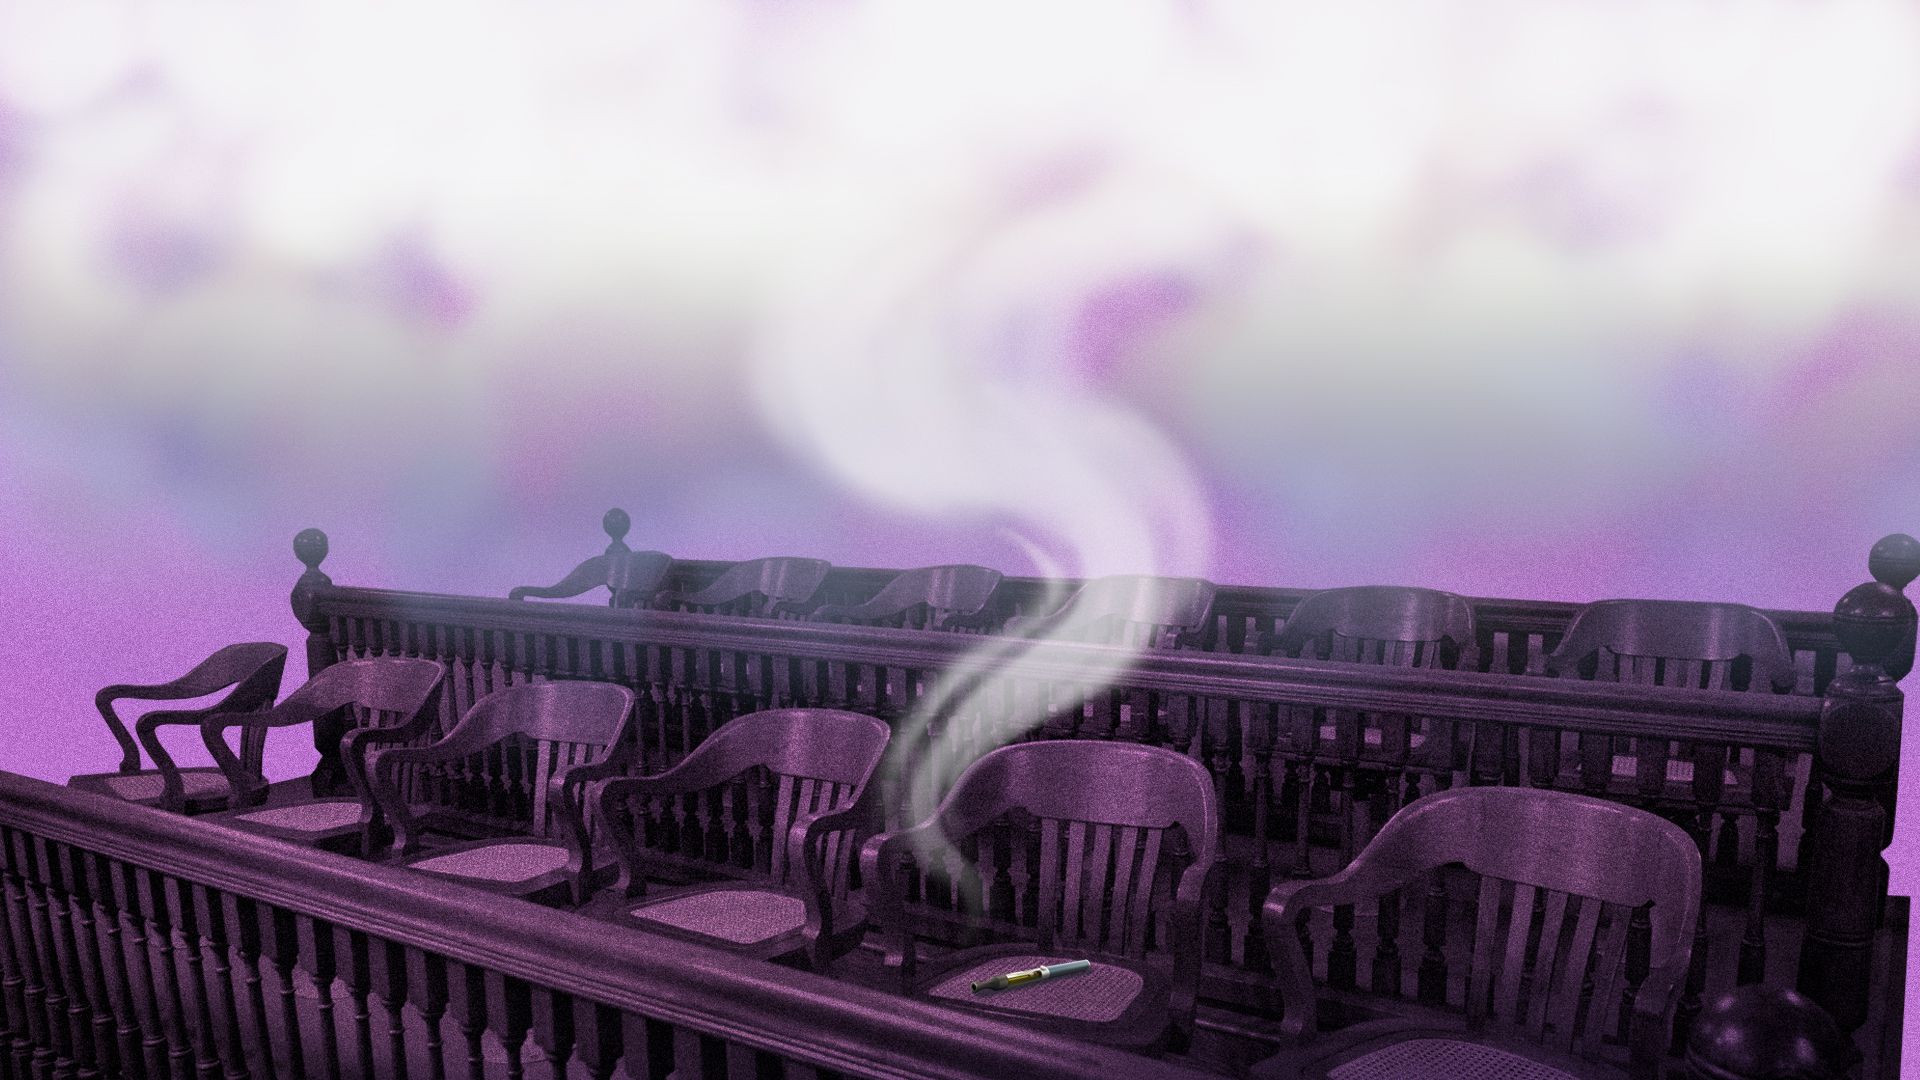 A row of jury chairs in a courtroom with one e-cigarette on a chair causing the air around the chairs to be smokey. 